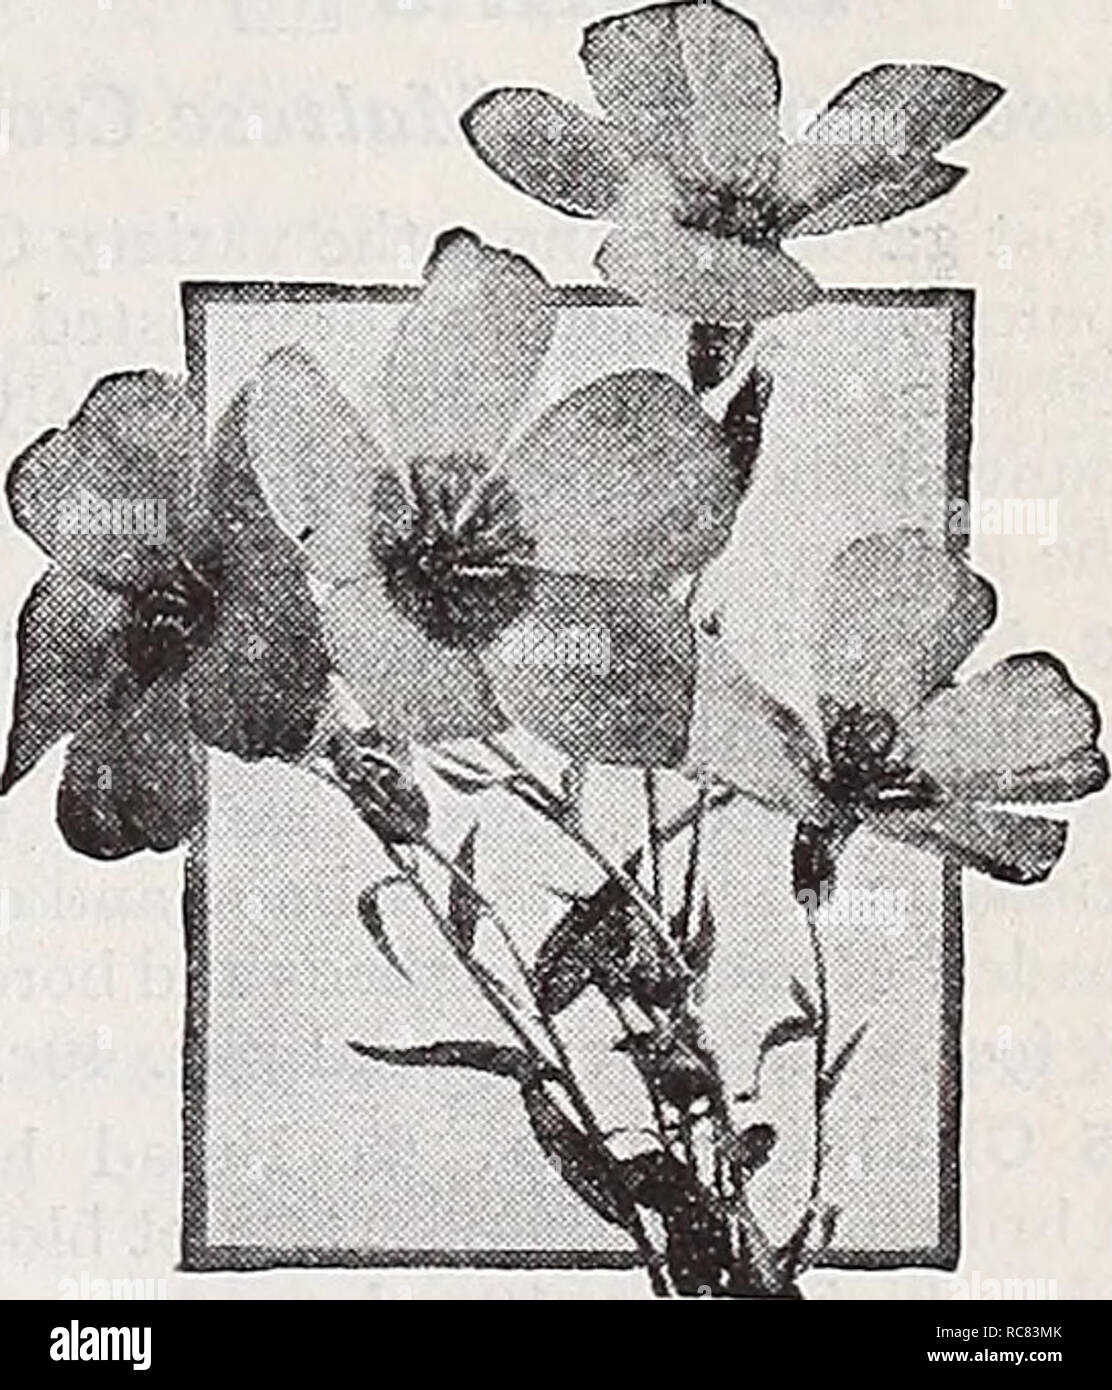 . Dreer's garden book 1939 : 101 years of Dreer quality seeds plants bulbs. Seeds Catalogs; Nursery stock Catalogs; Gardening Equipment and supplies Catalogs; Flowers Seeds Catalogs; Vegetables Seeds Catalogs; Fruit Seeds Catalogs. Linaria, Fairy Bouquet Linaria ® &amp; iH a 2795 Cymbalaria {Kenilworth Ivy, Mother of Thousands). 11 ® A charming, neat, hardy perennial trailing plant with lovely bright green foliage and graceful lavender and purple flowers. Pkt. 10c; special pkt. SOc. 2797 Maroccana, Excelsior Hybrids. ® A dainty, easy-to-grow annual bear- ing small spikes like miniature Snap- d Stock Photo